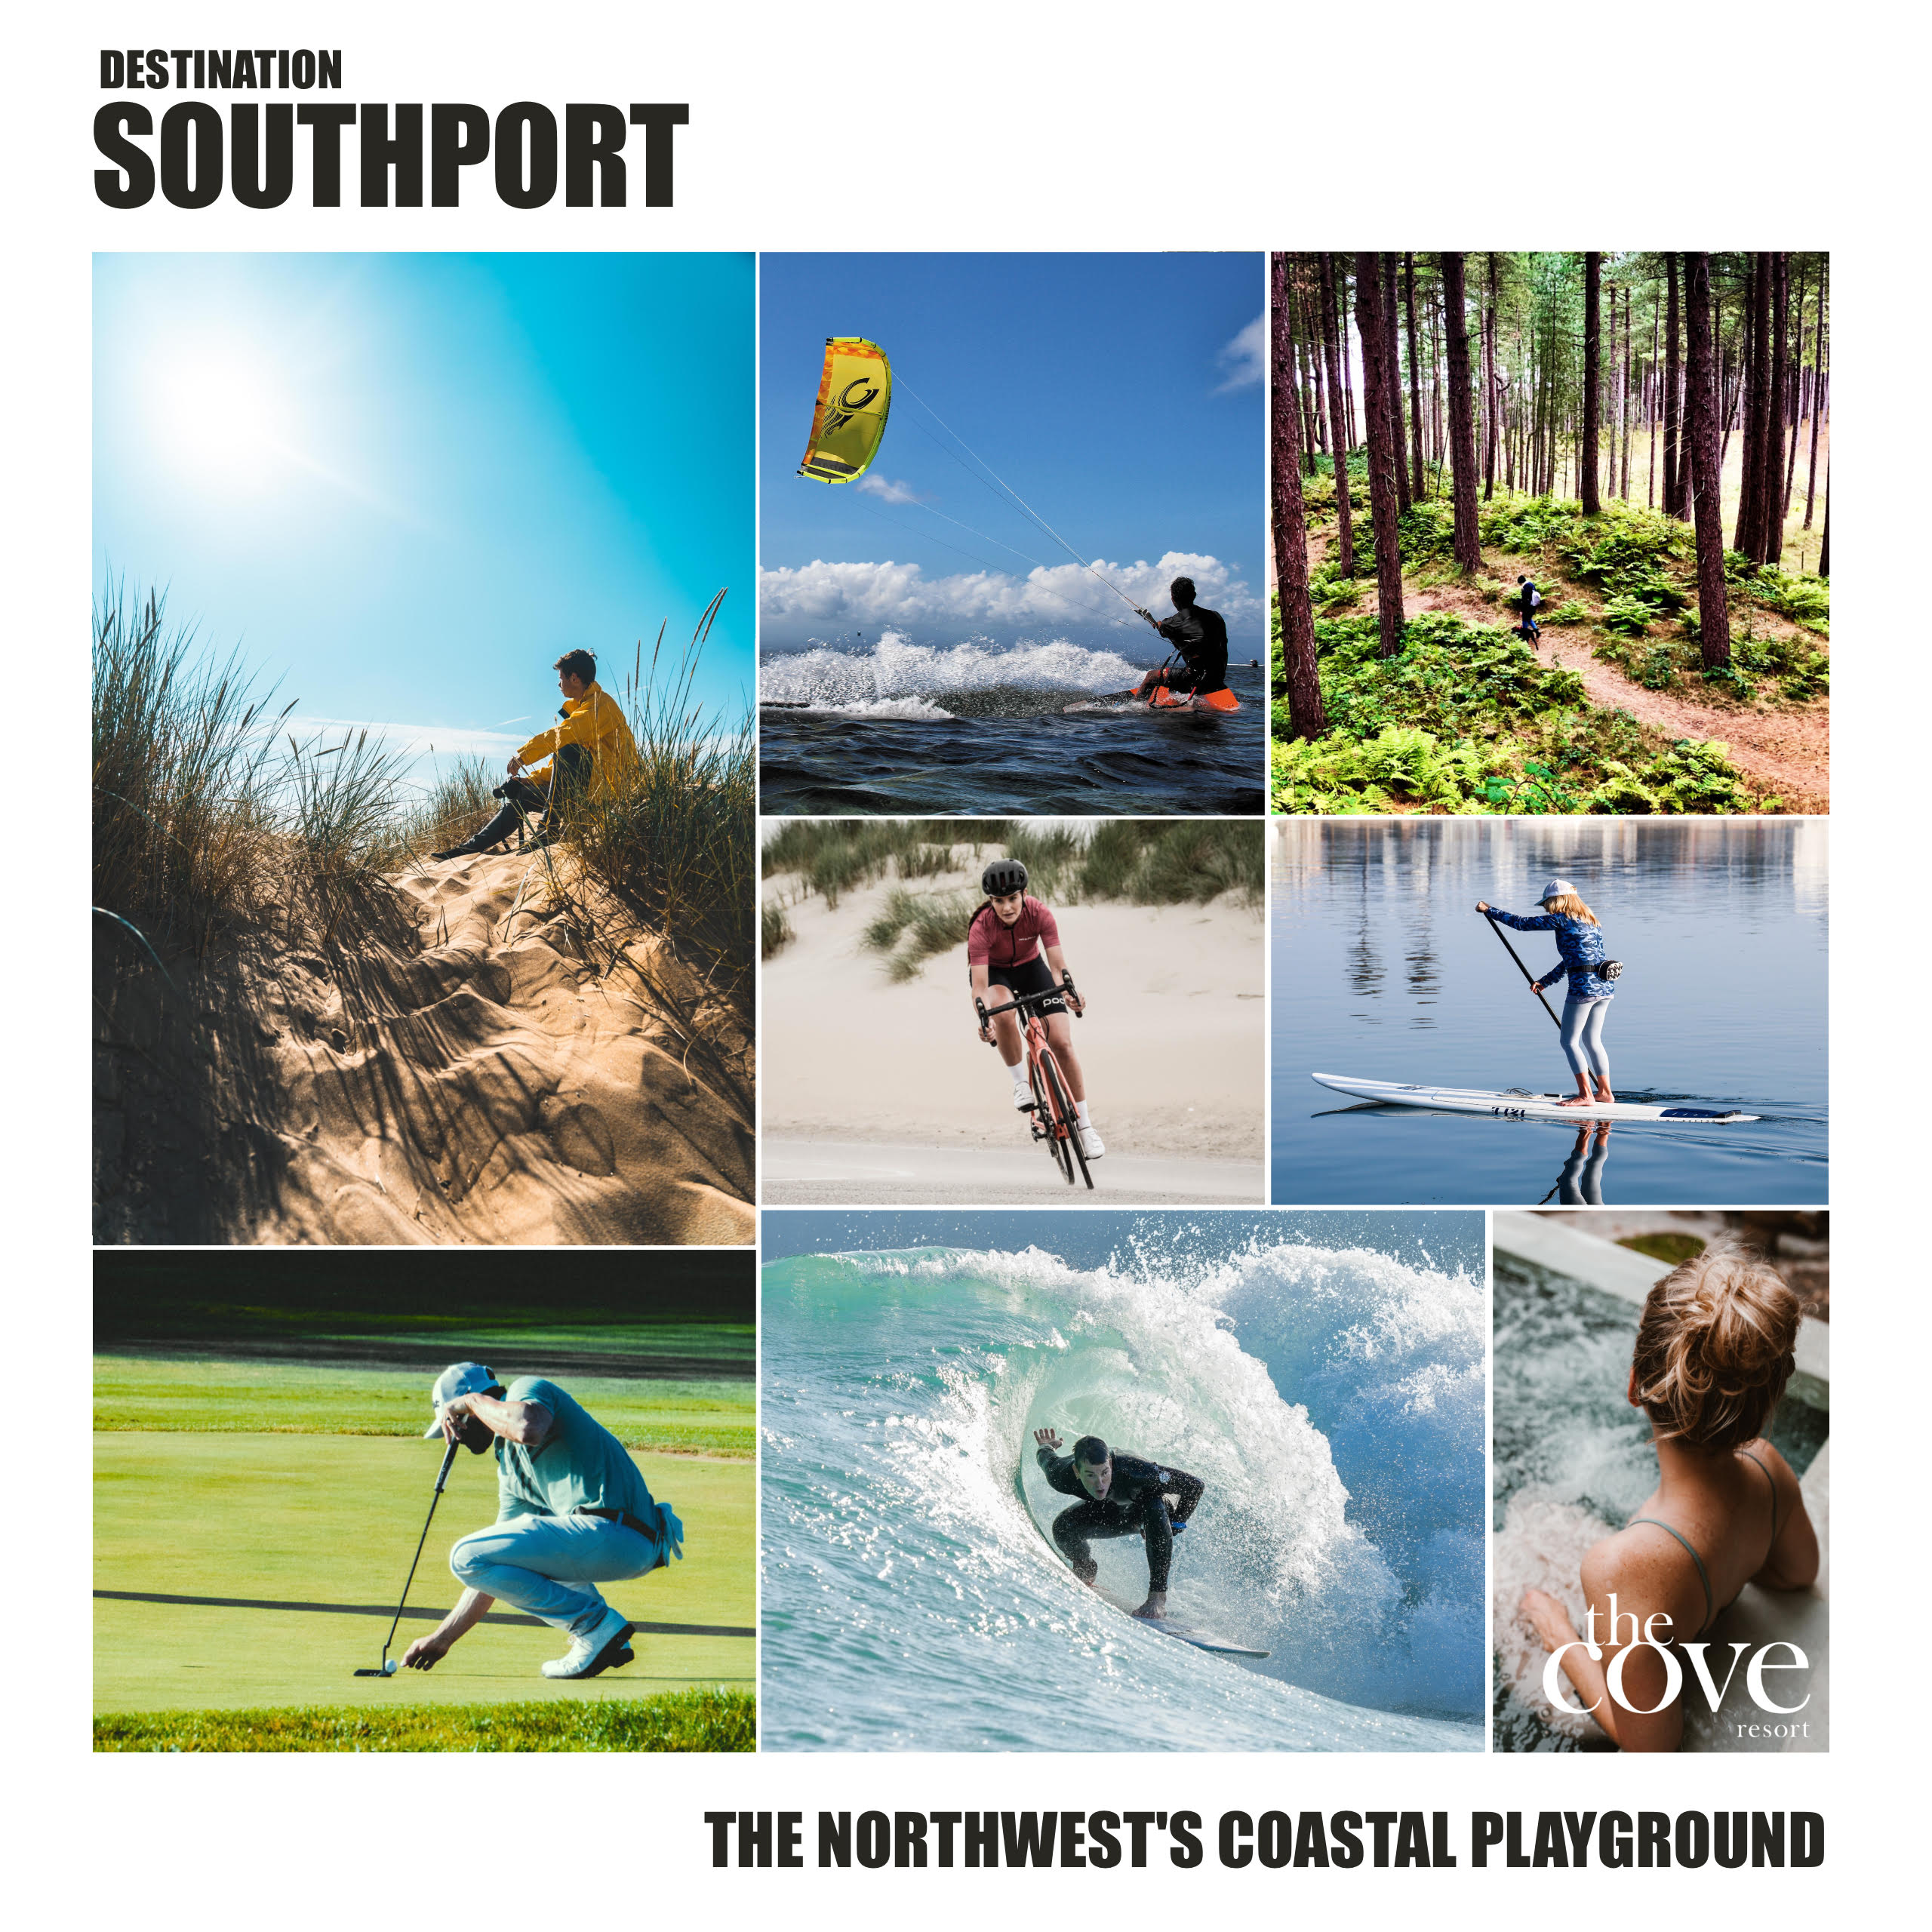 Southport is home to great beaches, woods and water sports